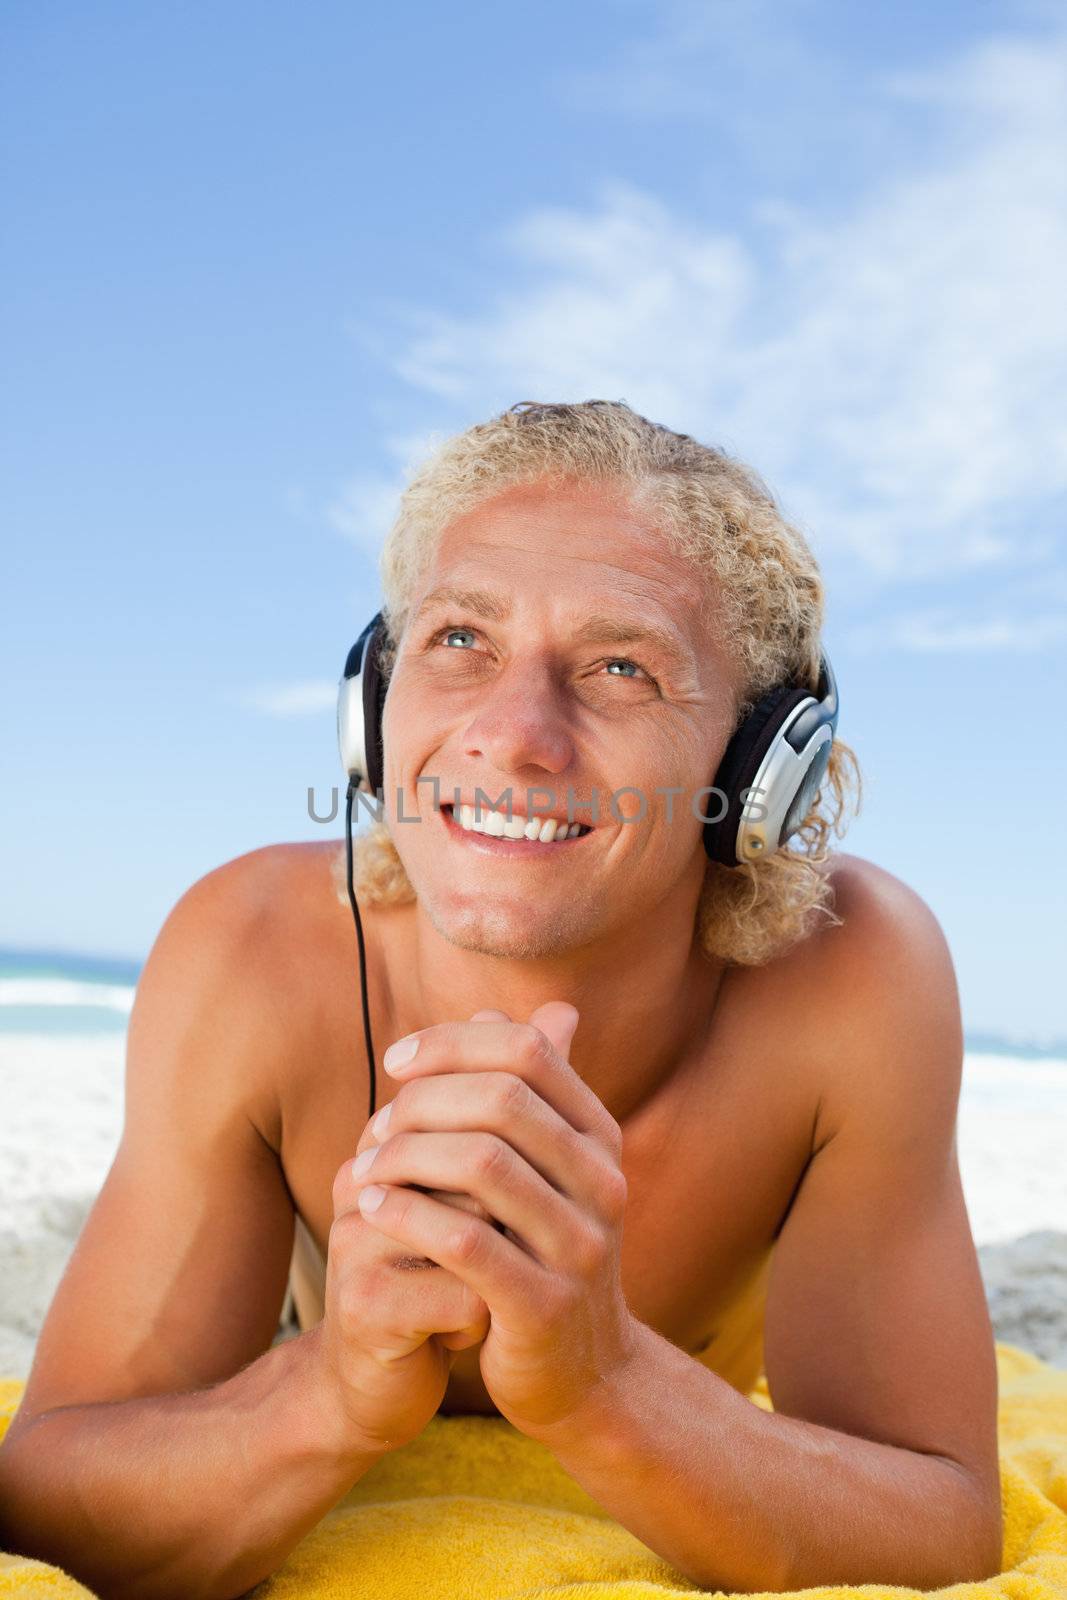 Smiling man crossing his hands while listening to music with his headset